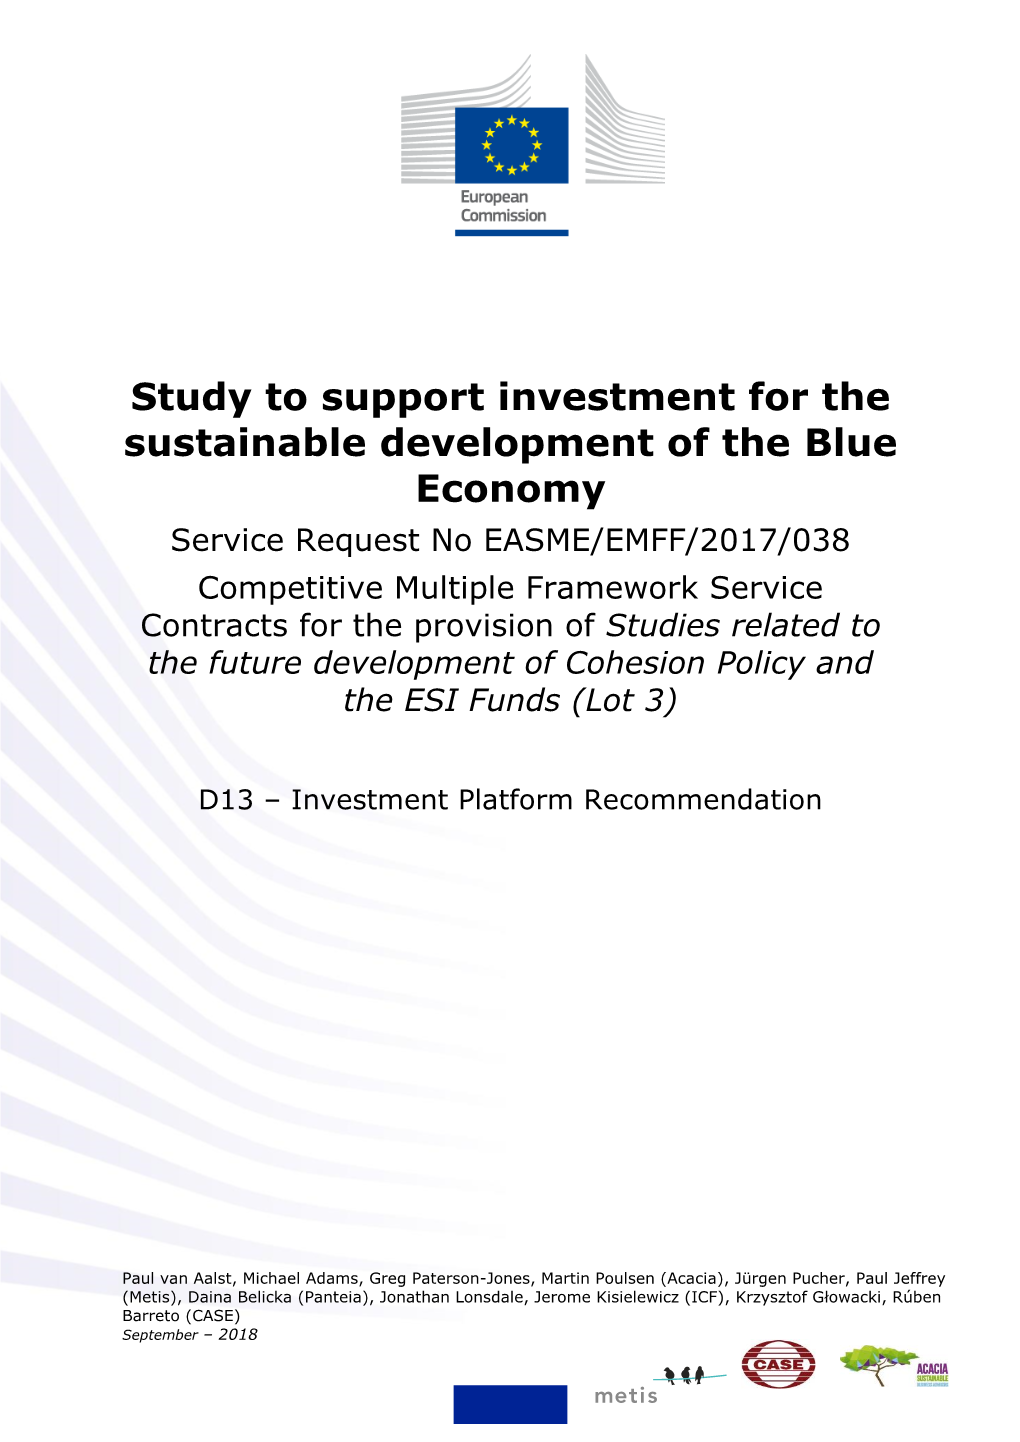 Study to Support Investment for the Sustainable Development of The